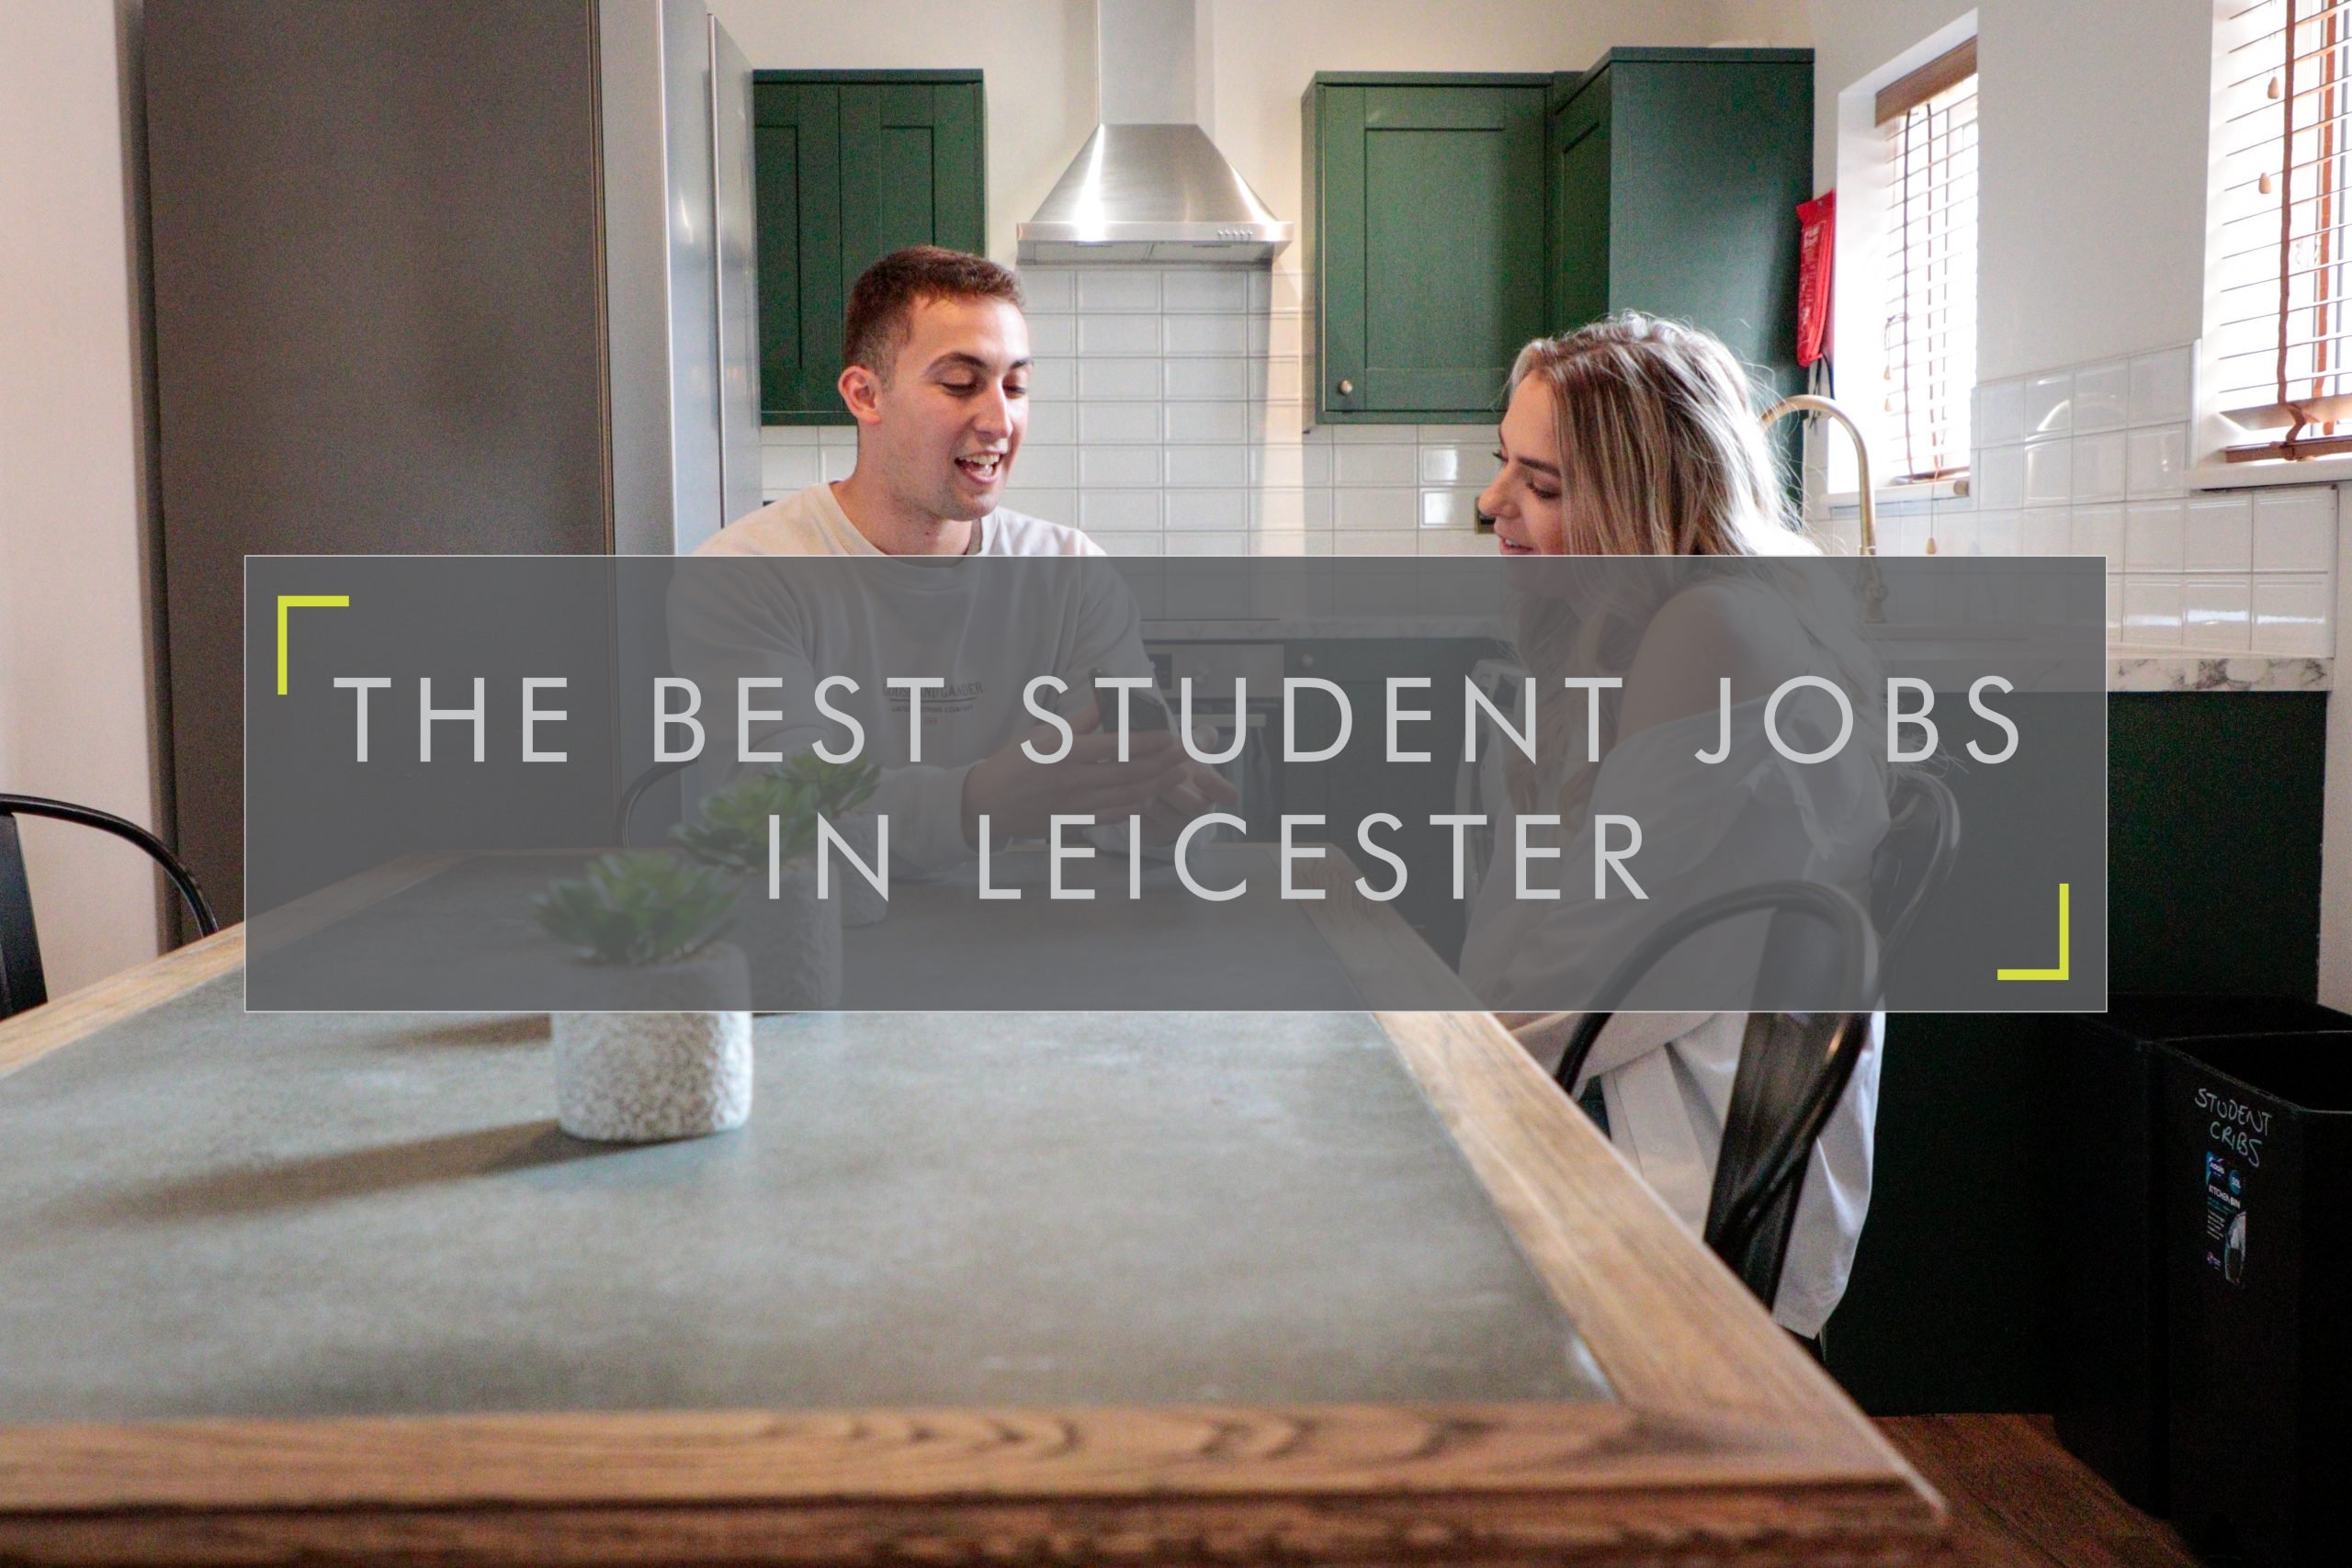 THE BEST STUDENT JOBS IN LEICESTER